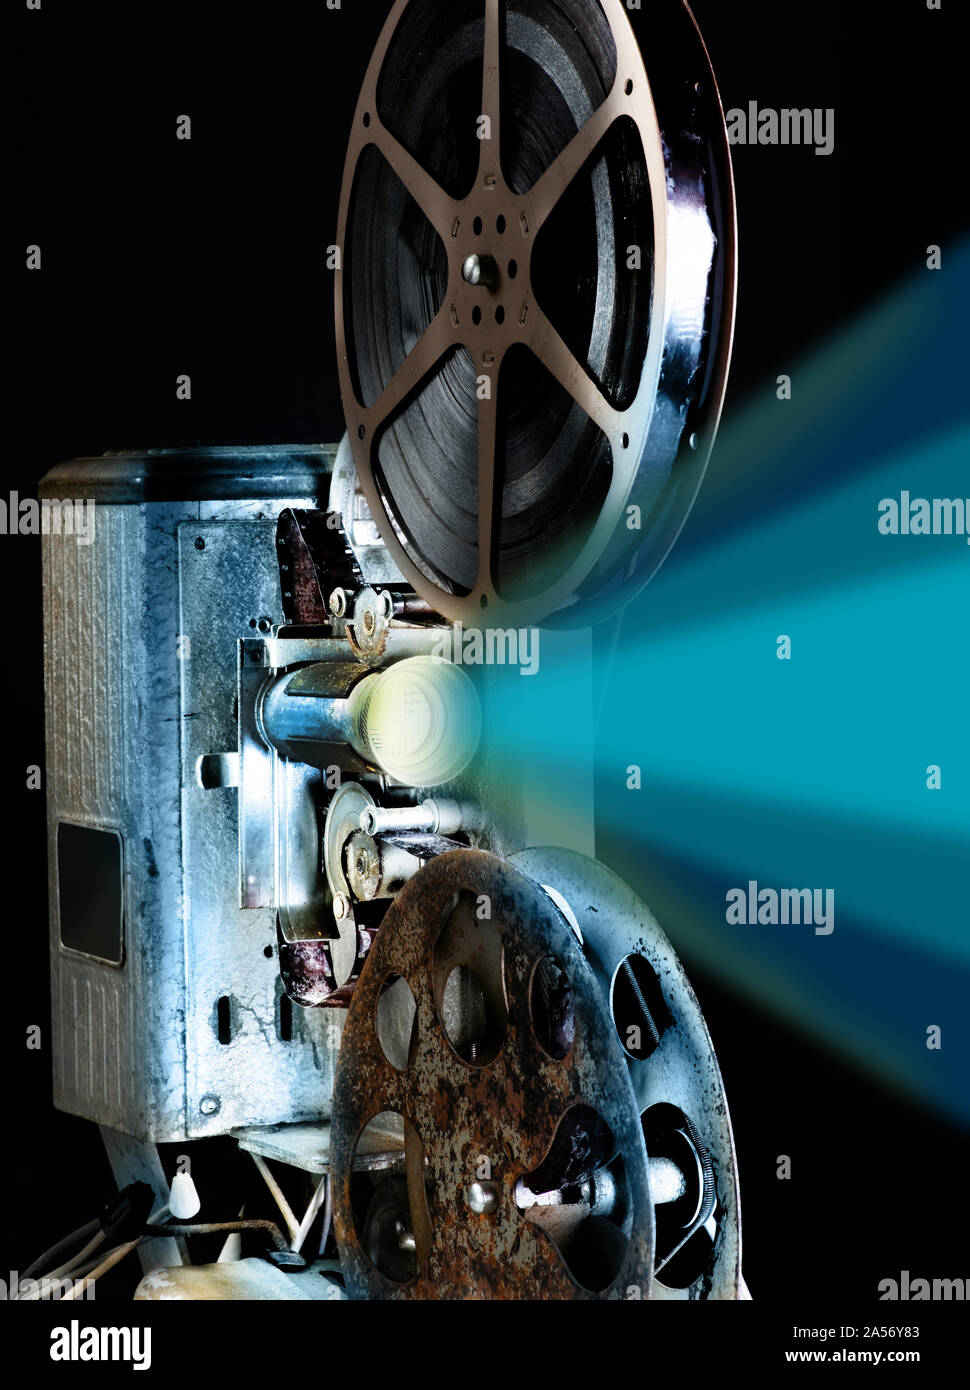 https://c8.alamy.com/comp/2A56Y83/16mm-film-projector-from-the-1940s-2A56Y83.jpg